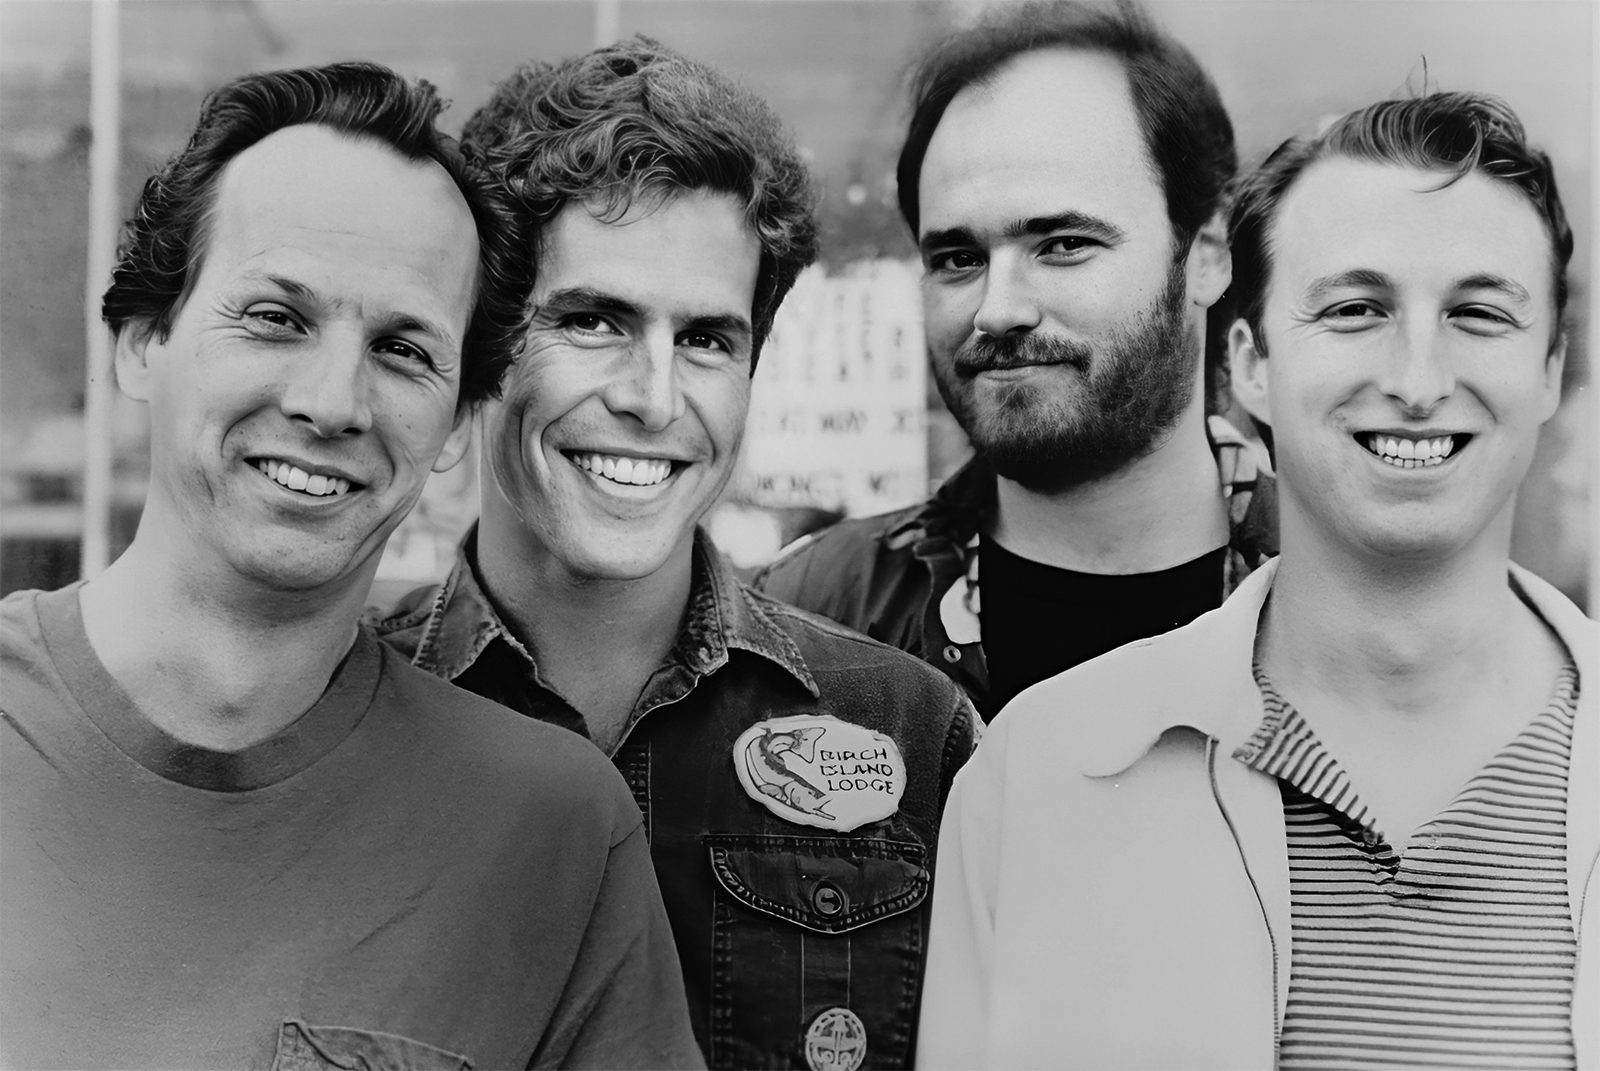 The Bears Rob Fetters Bob Nyswonger Adrian Belew Chris Arduser